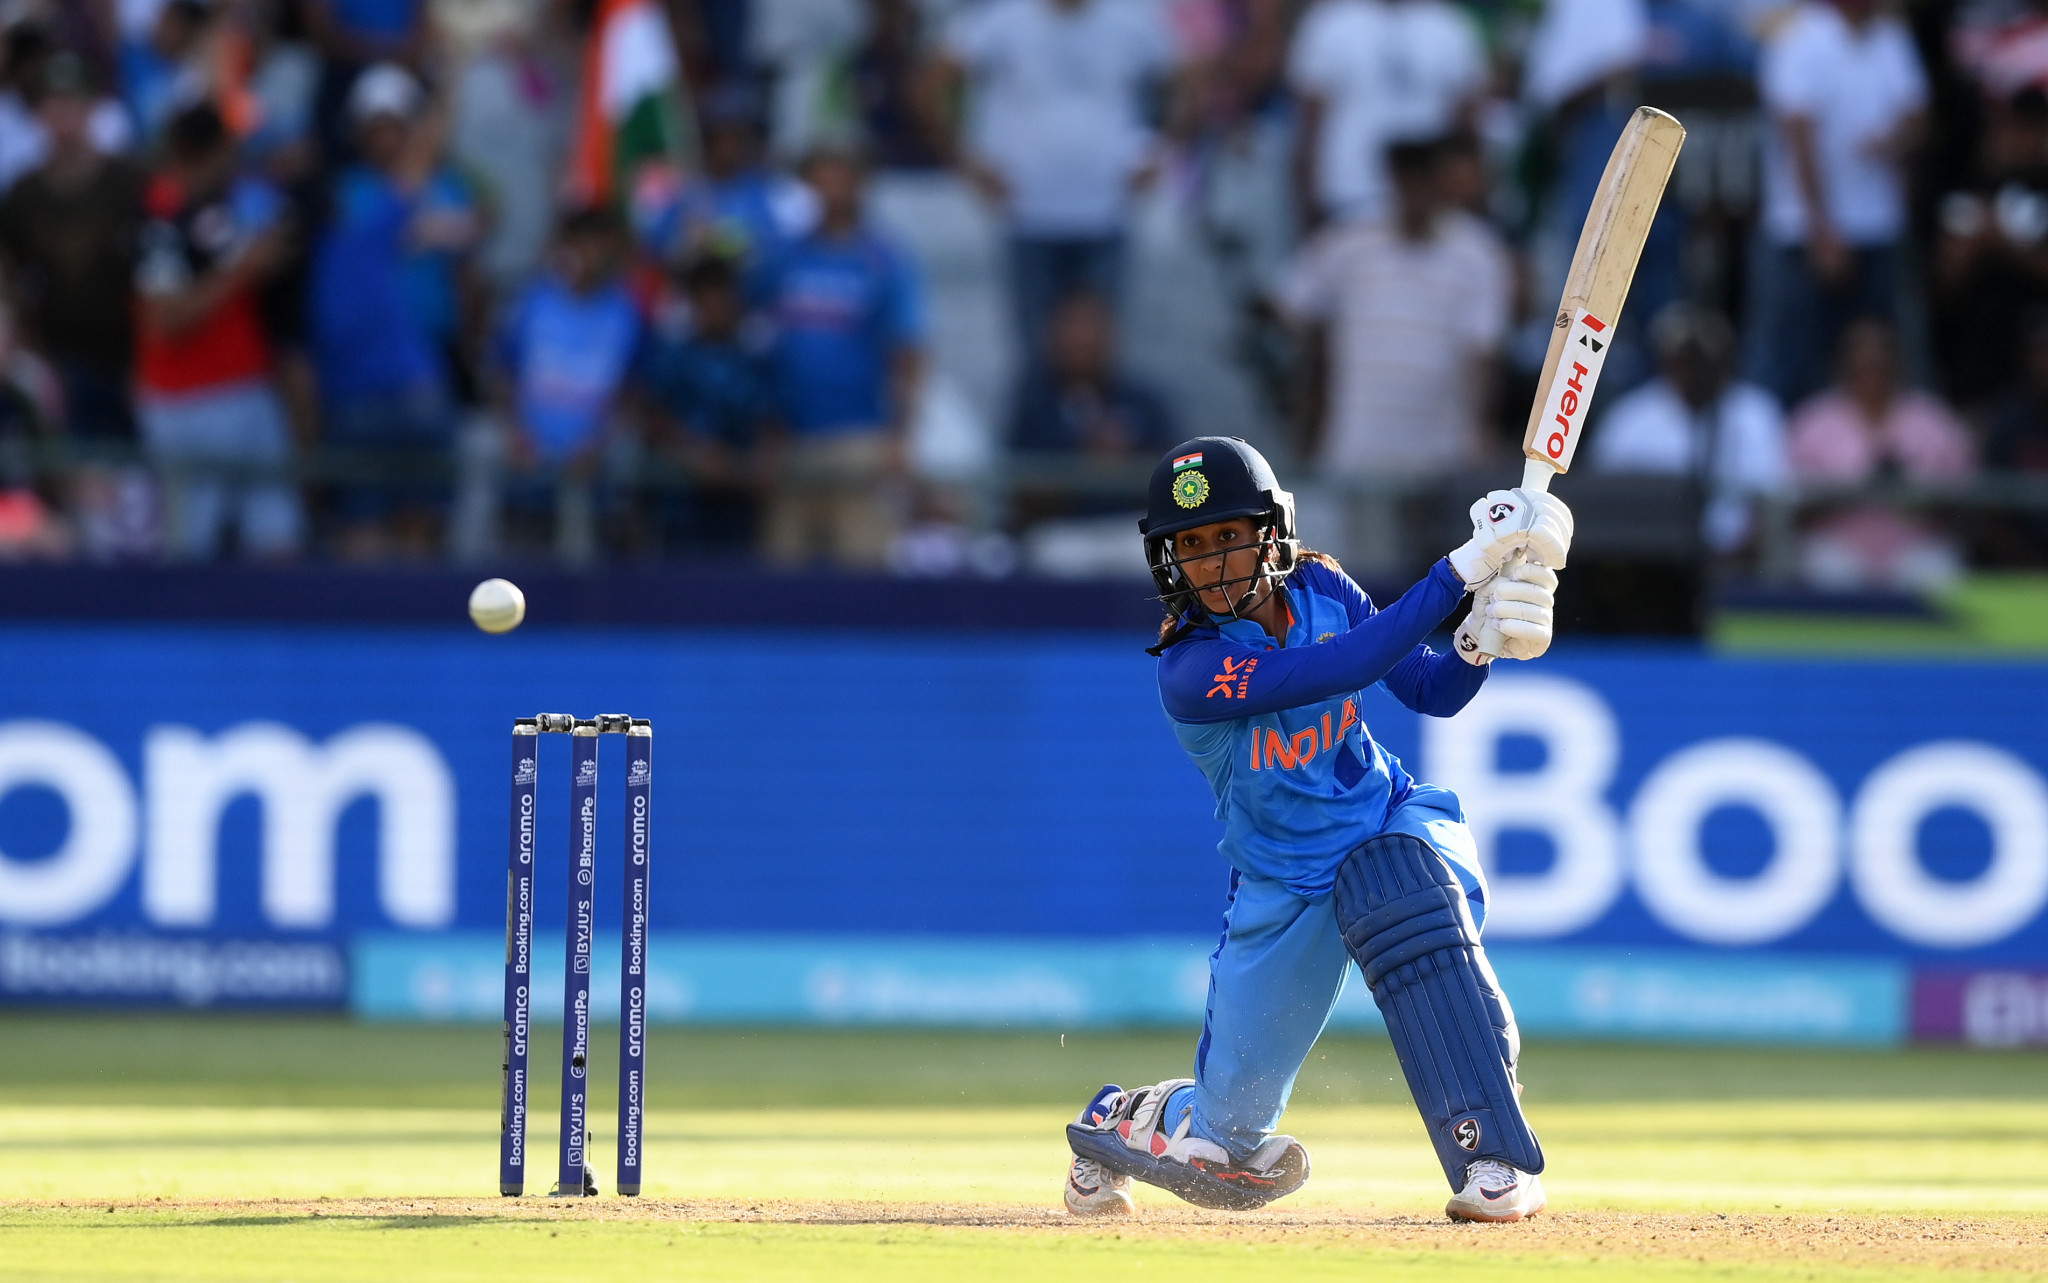 India's Jemimah Rodrigues top scored with an unbeaten 53 as her side beat Pakistan at the Women's T20 World Cup ©Getty Images